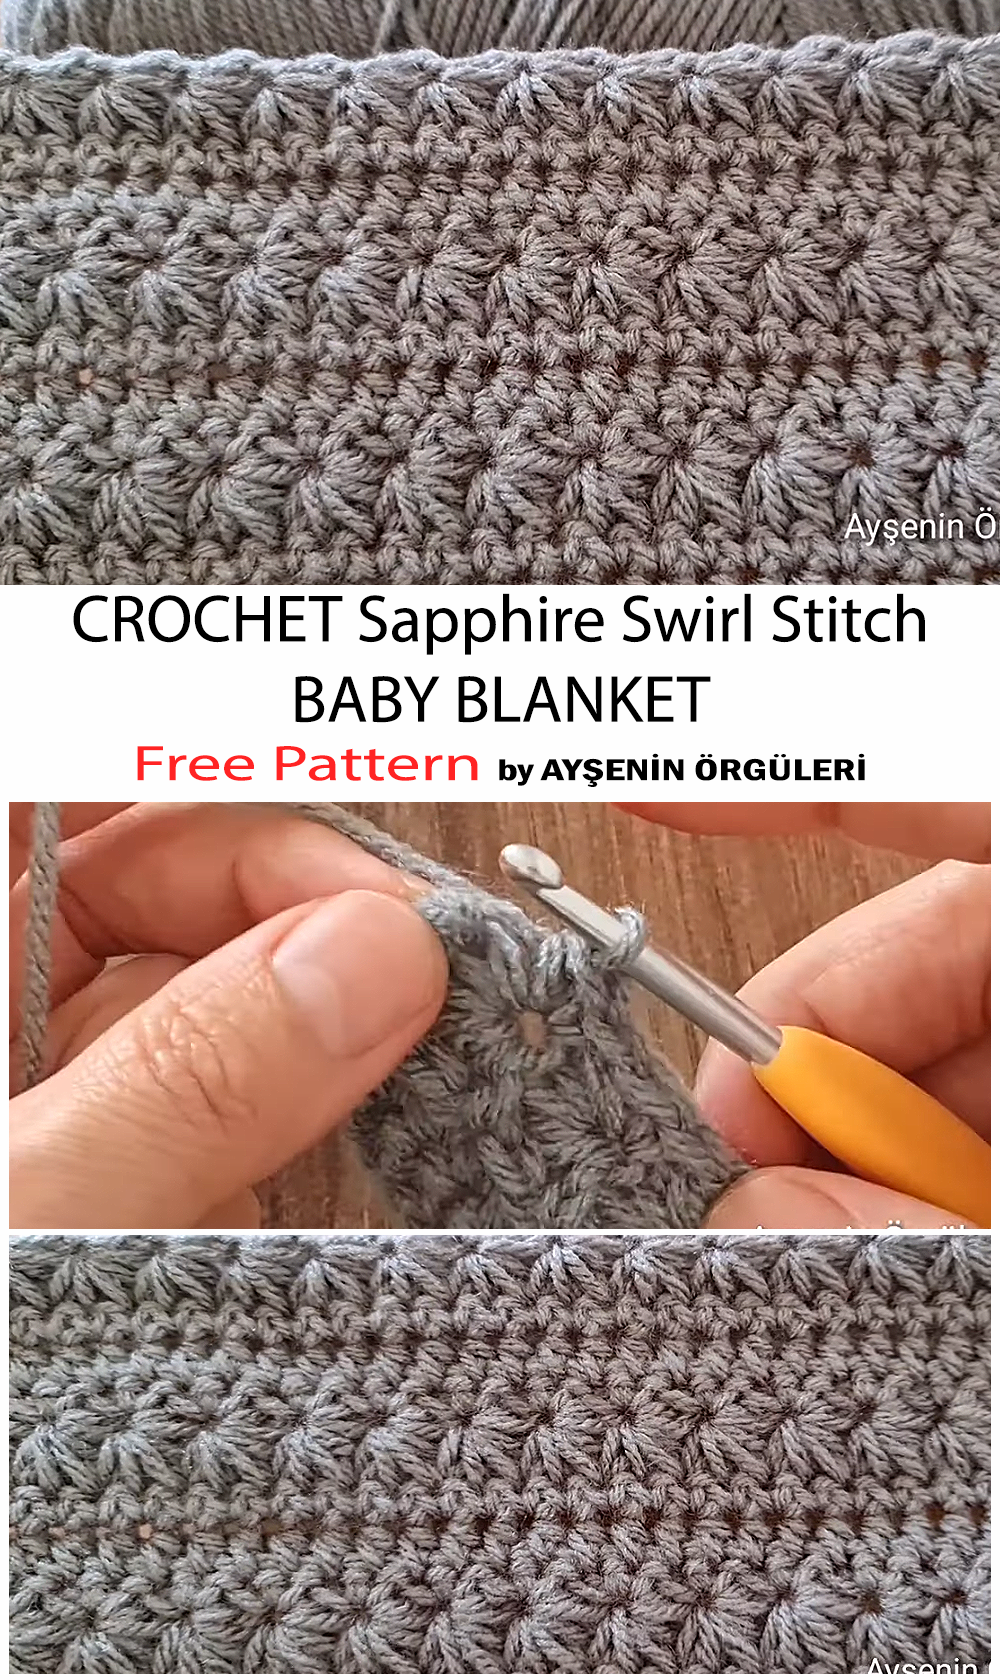 How To Crochet Sapphire Swirl Stitch Baby Blanket - Free Pattern For Beginners